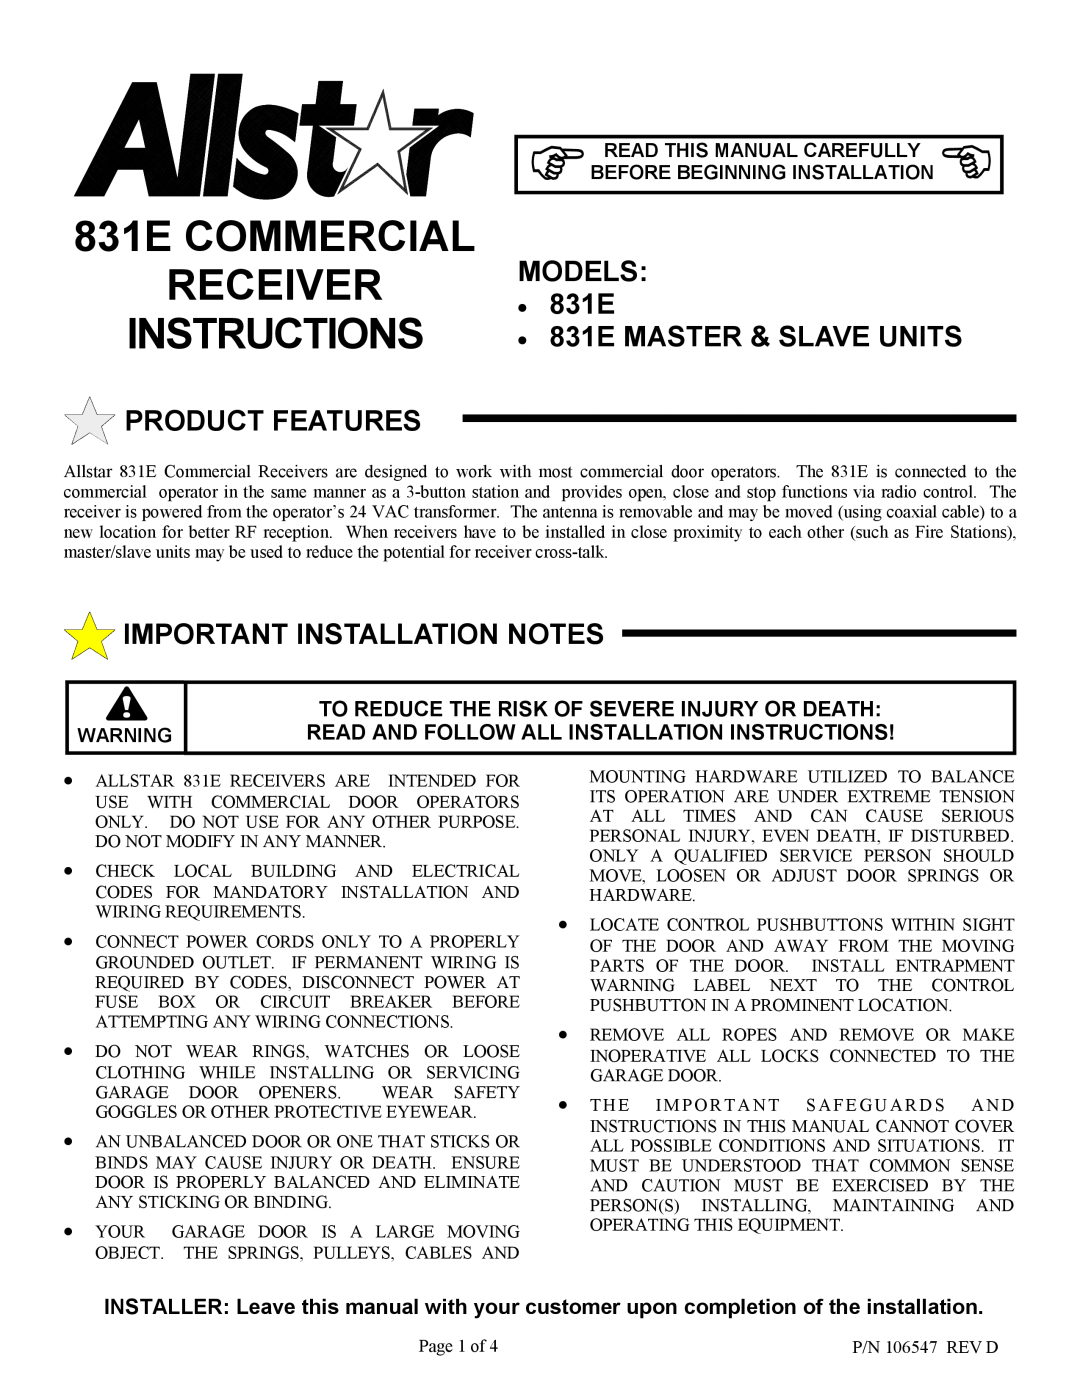 Allstar Products Group installation instructions 831E COMMERCIAL, Receiver, Instructions, Models, Product Features 